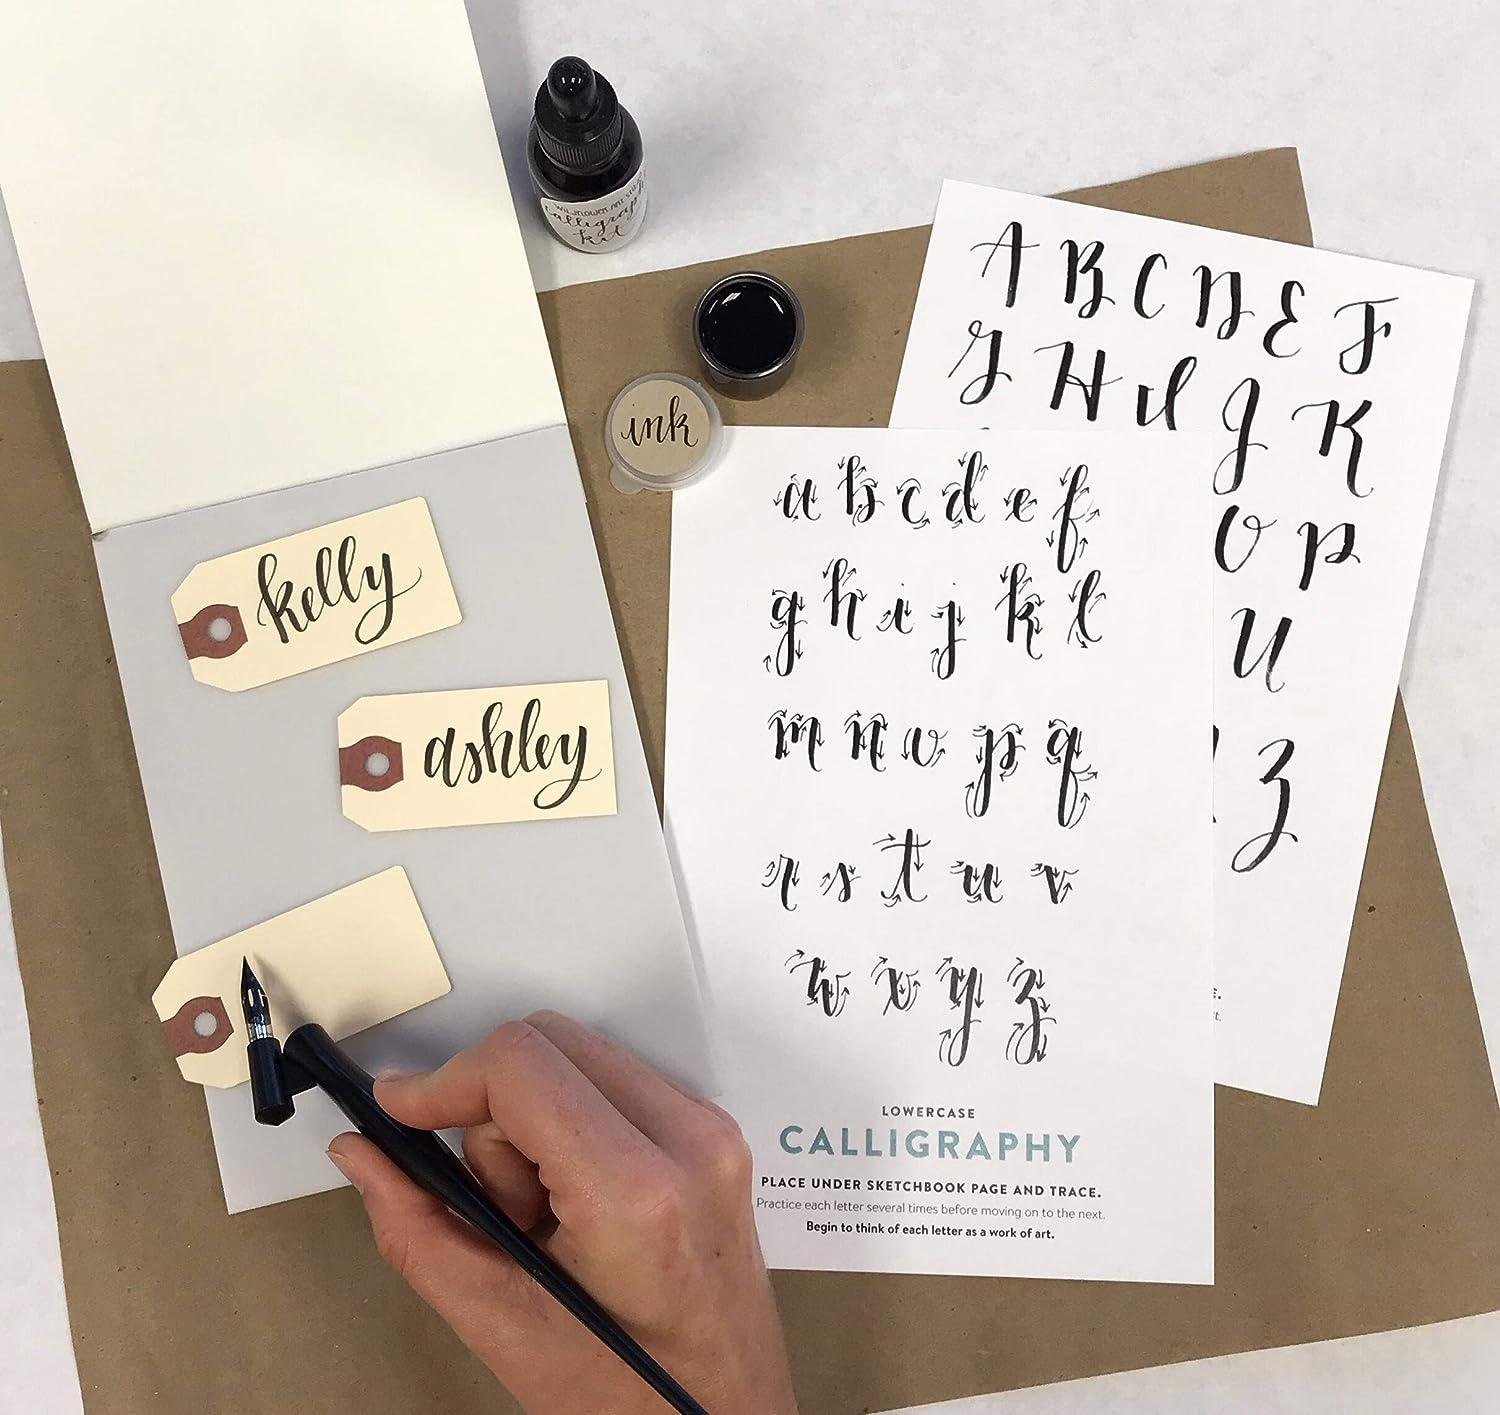 Classic Calligraphy for Beginners – St. Louis Art Supply